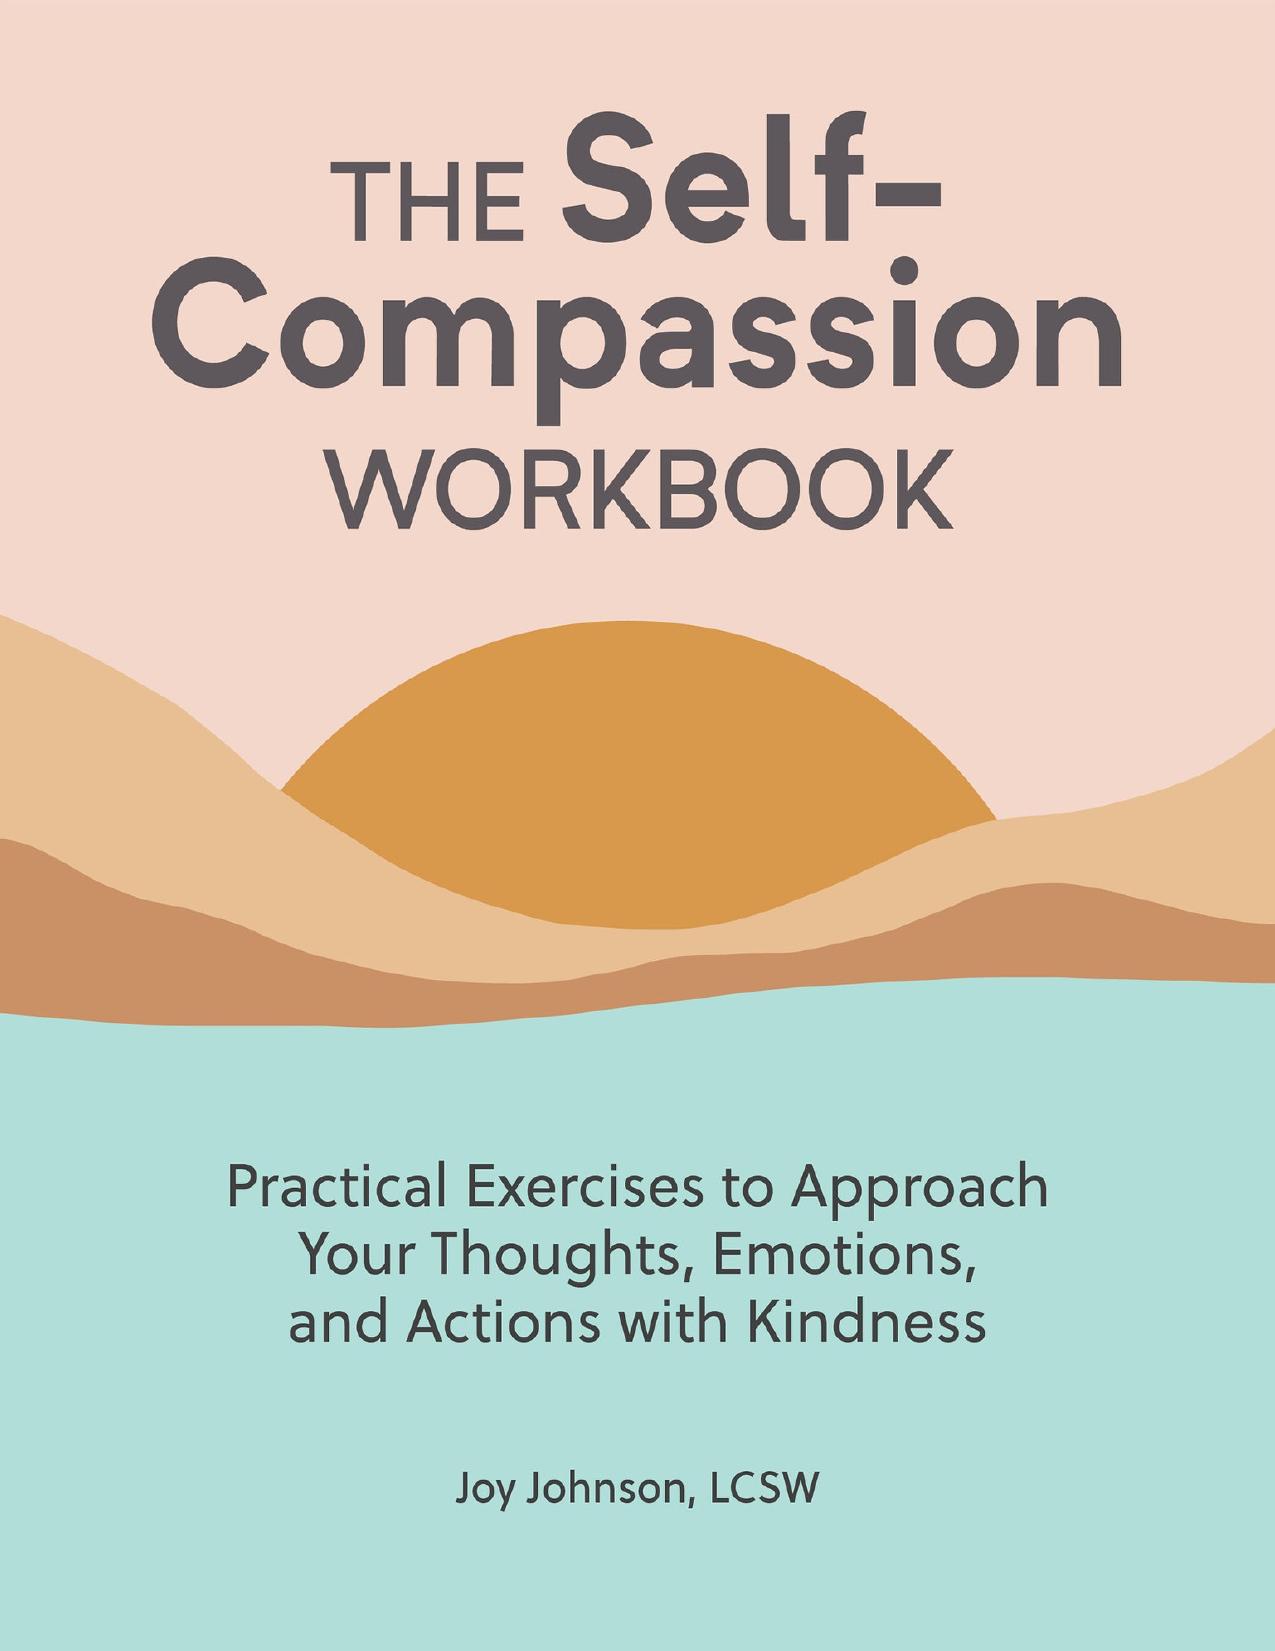 The Self Compassion Workbook: Practical Exercises to Approach Your Thoughts, Emotions, and Actions with Kindness by Johnson LCSW Joy